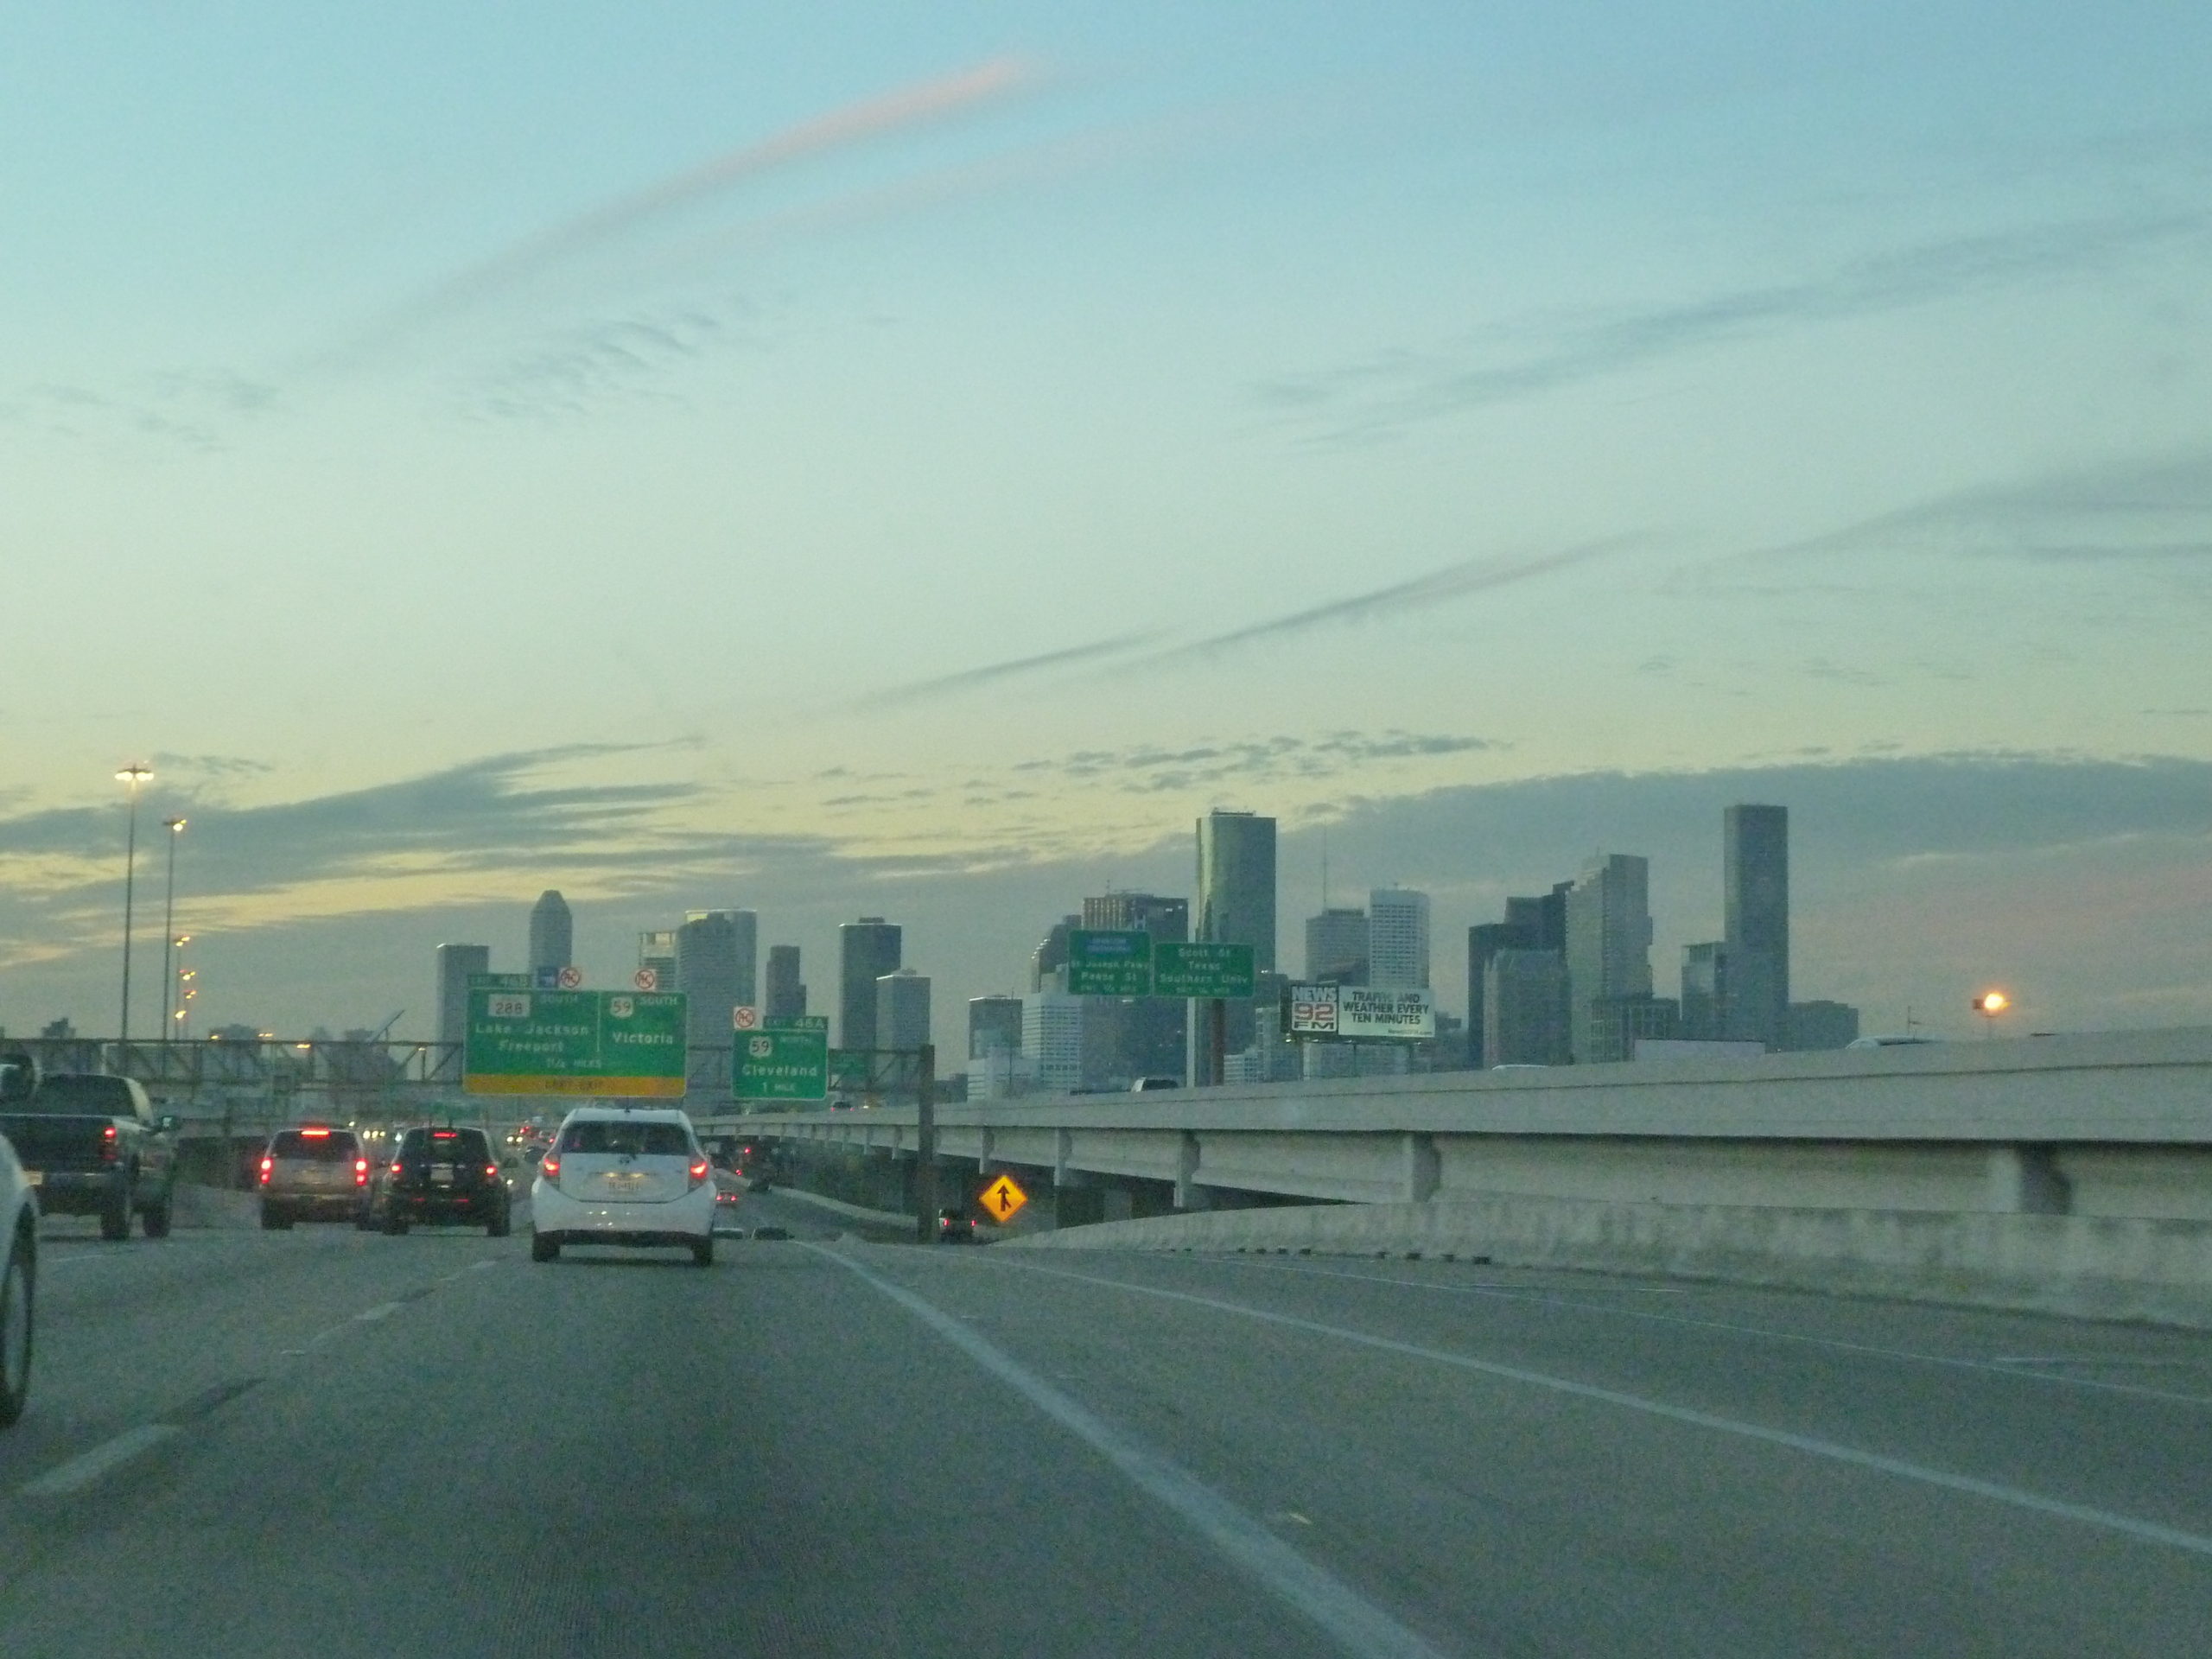 So, you've arrived in Houston.  Now what?